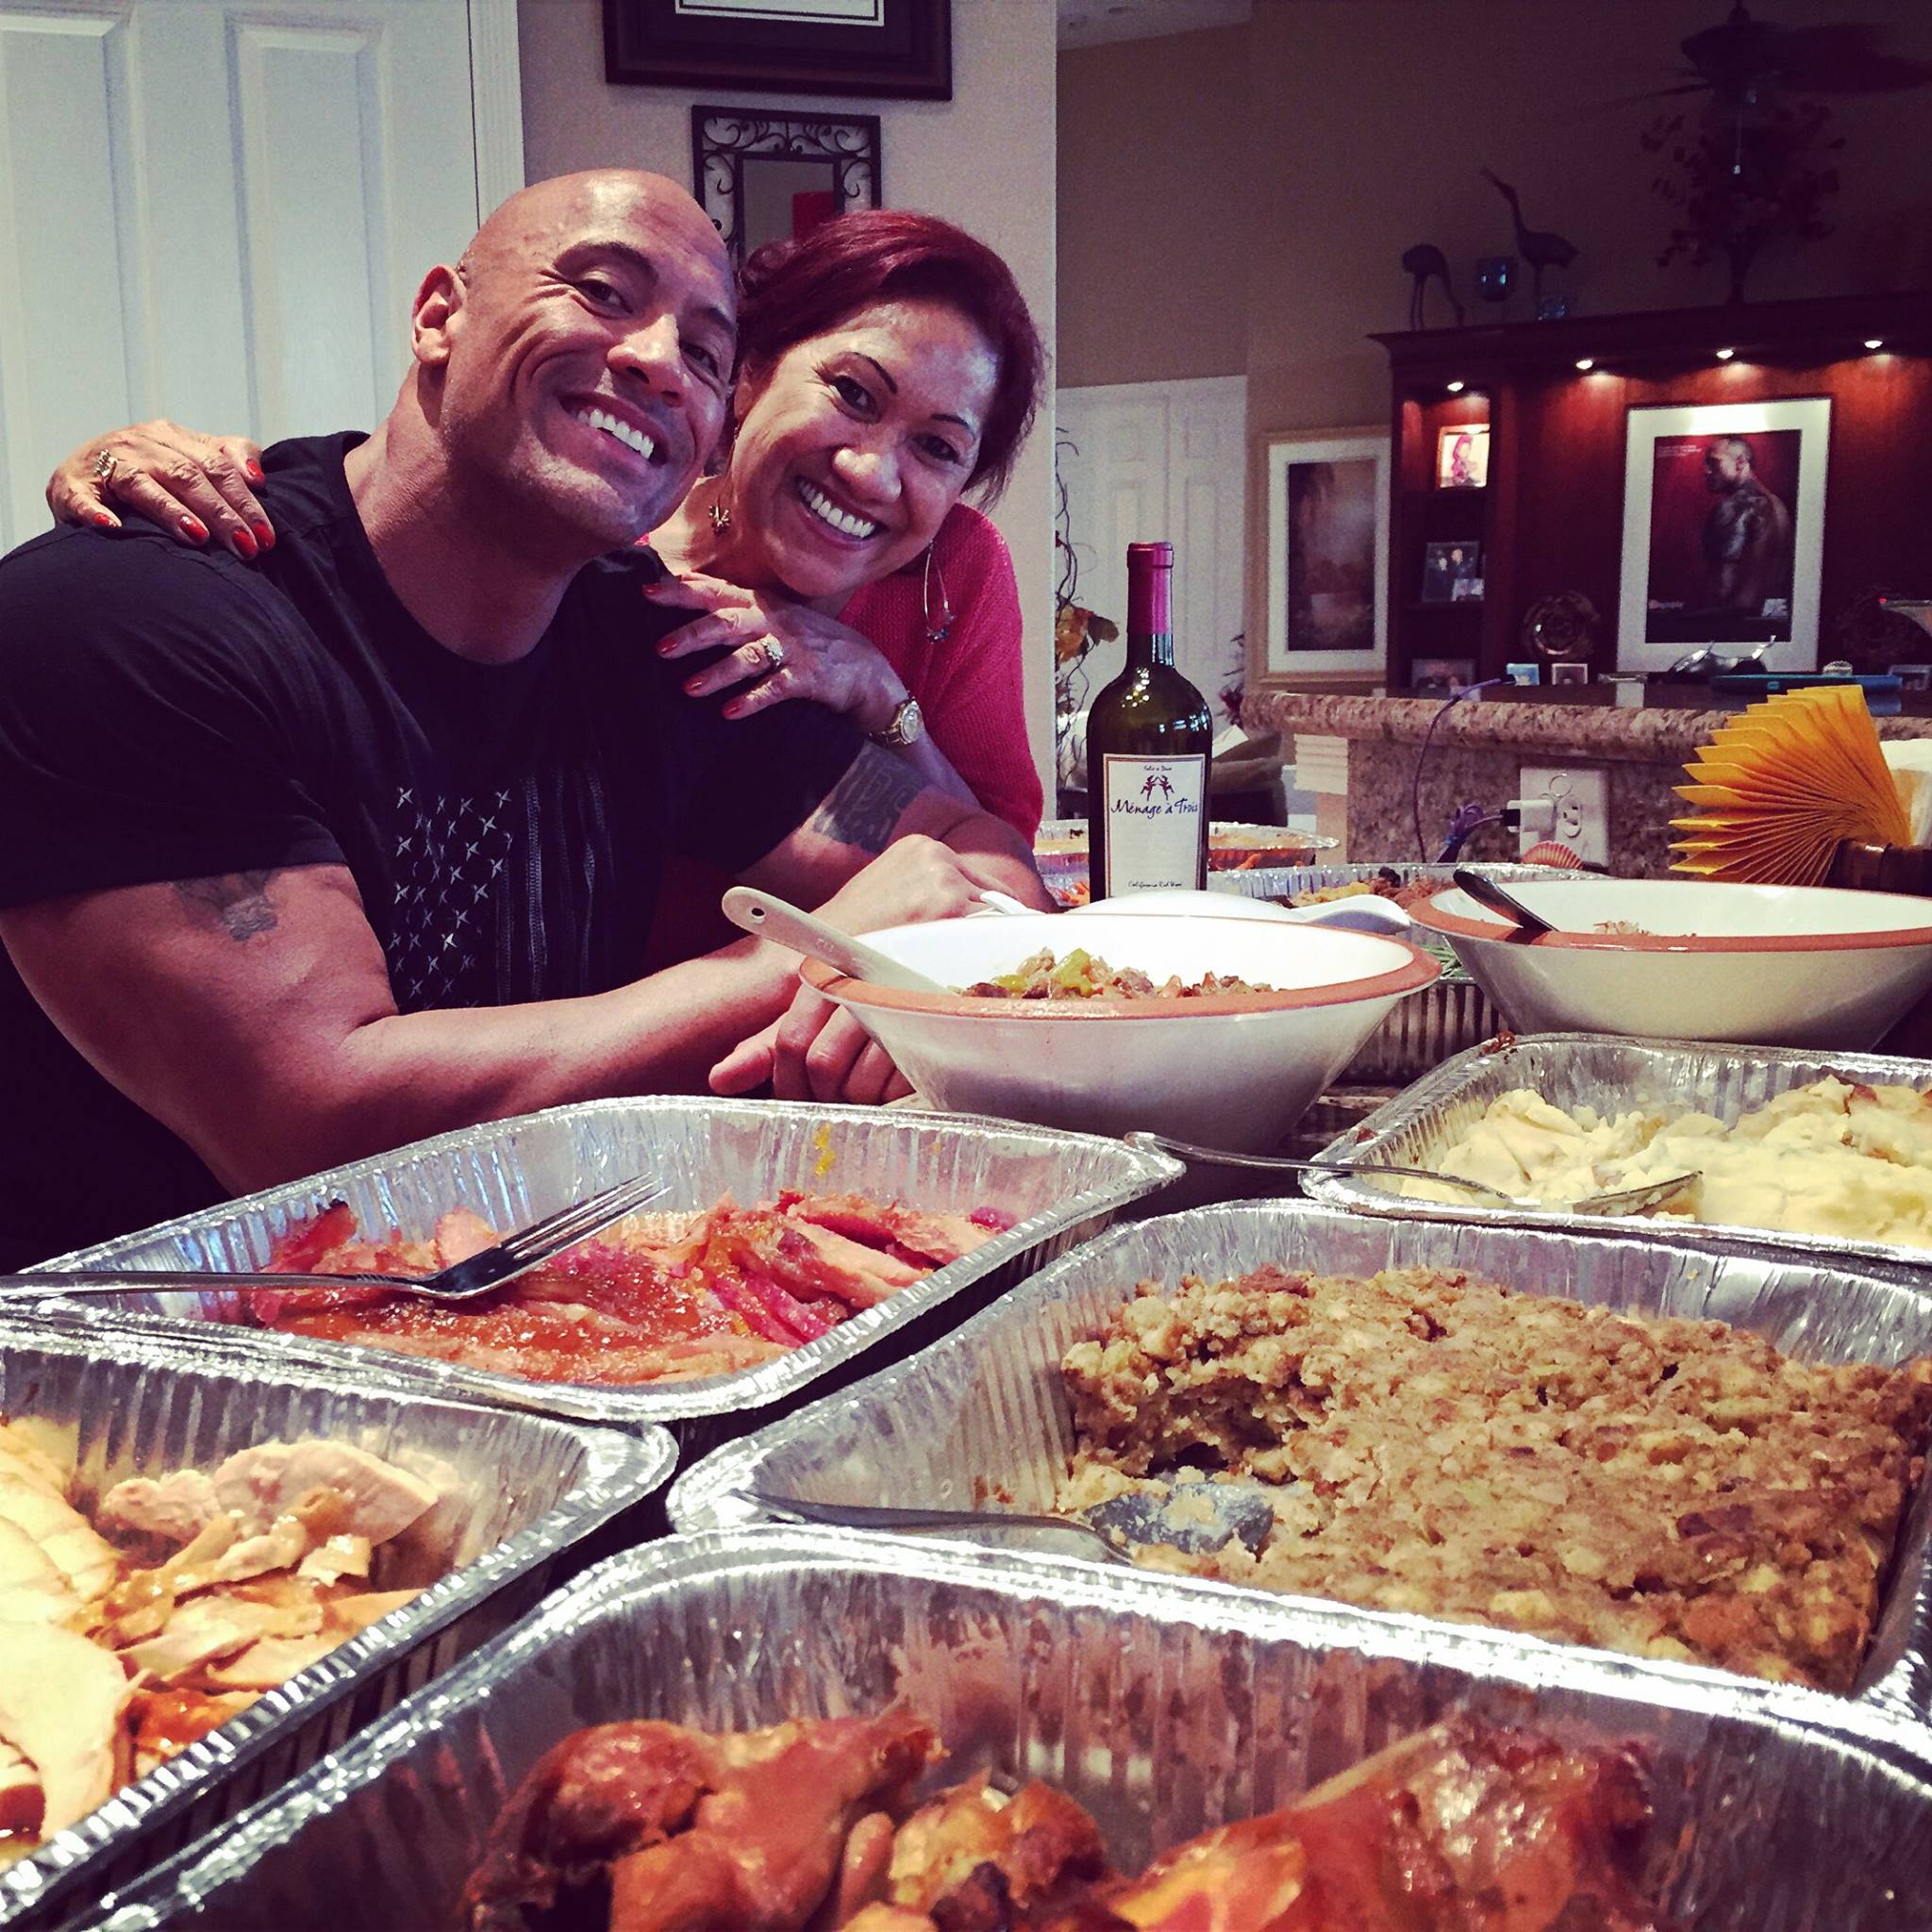 The Rock Shared That There Was A Time When He “couldn’t Even Afford To Buy A Turkey” On Thanksgiving – The Rock